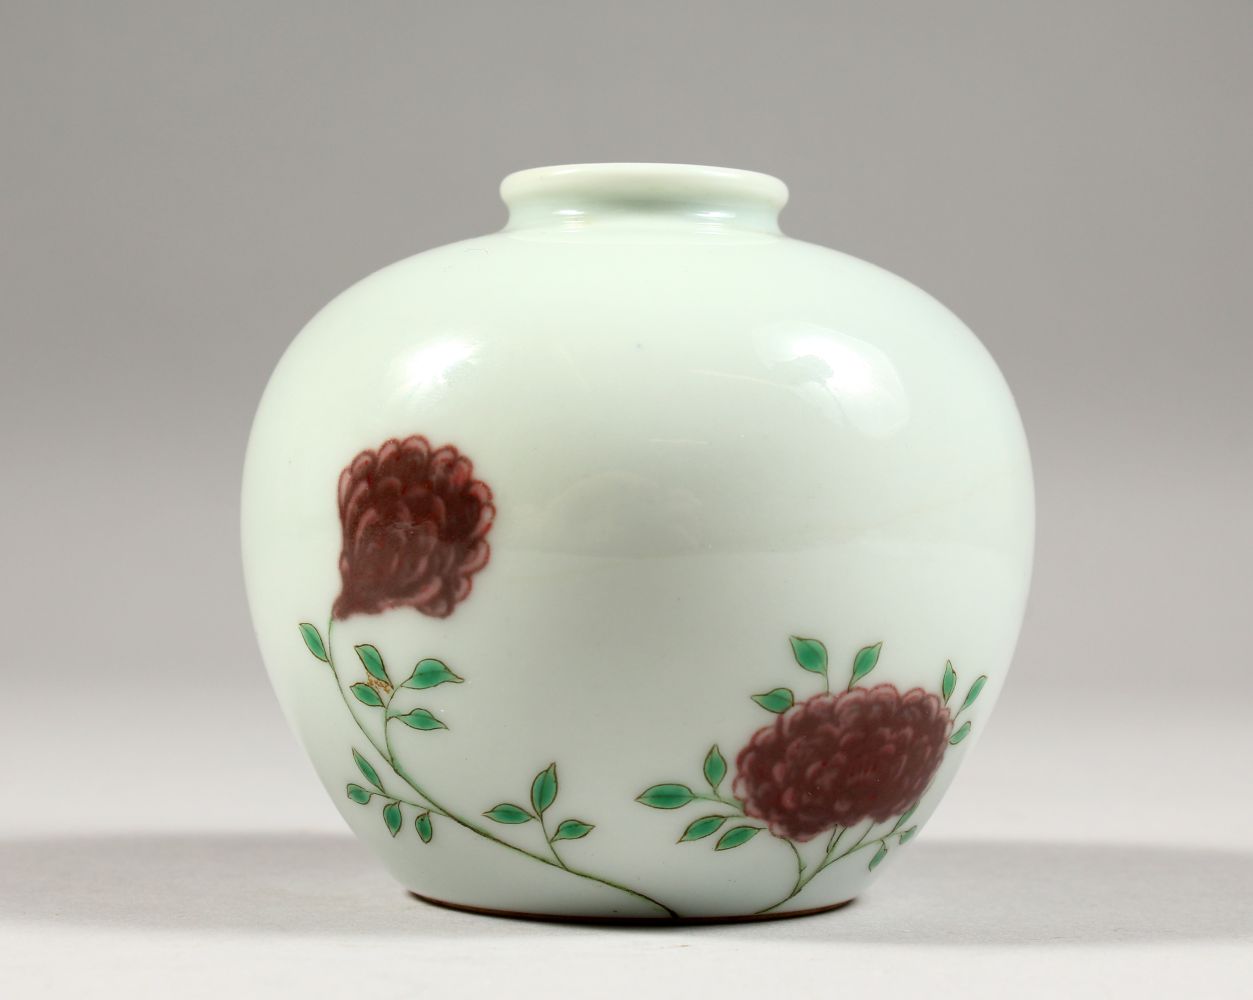 A GOOD CHINESE FAMILLE ROSE PORCELAIN APPLE SHAPED VASE, pale celadon ground with underglaze red